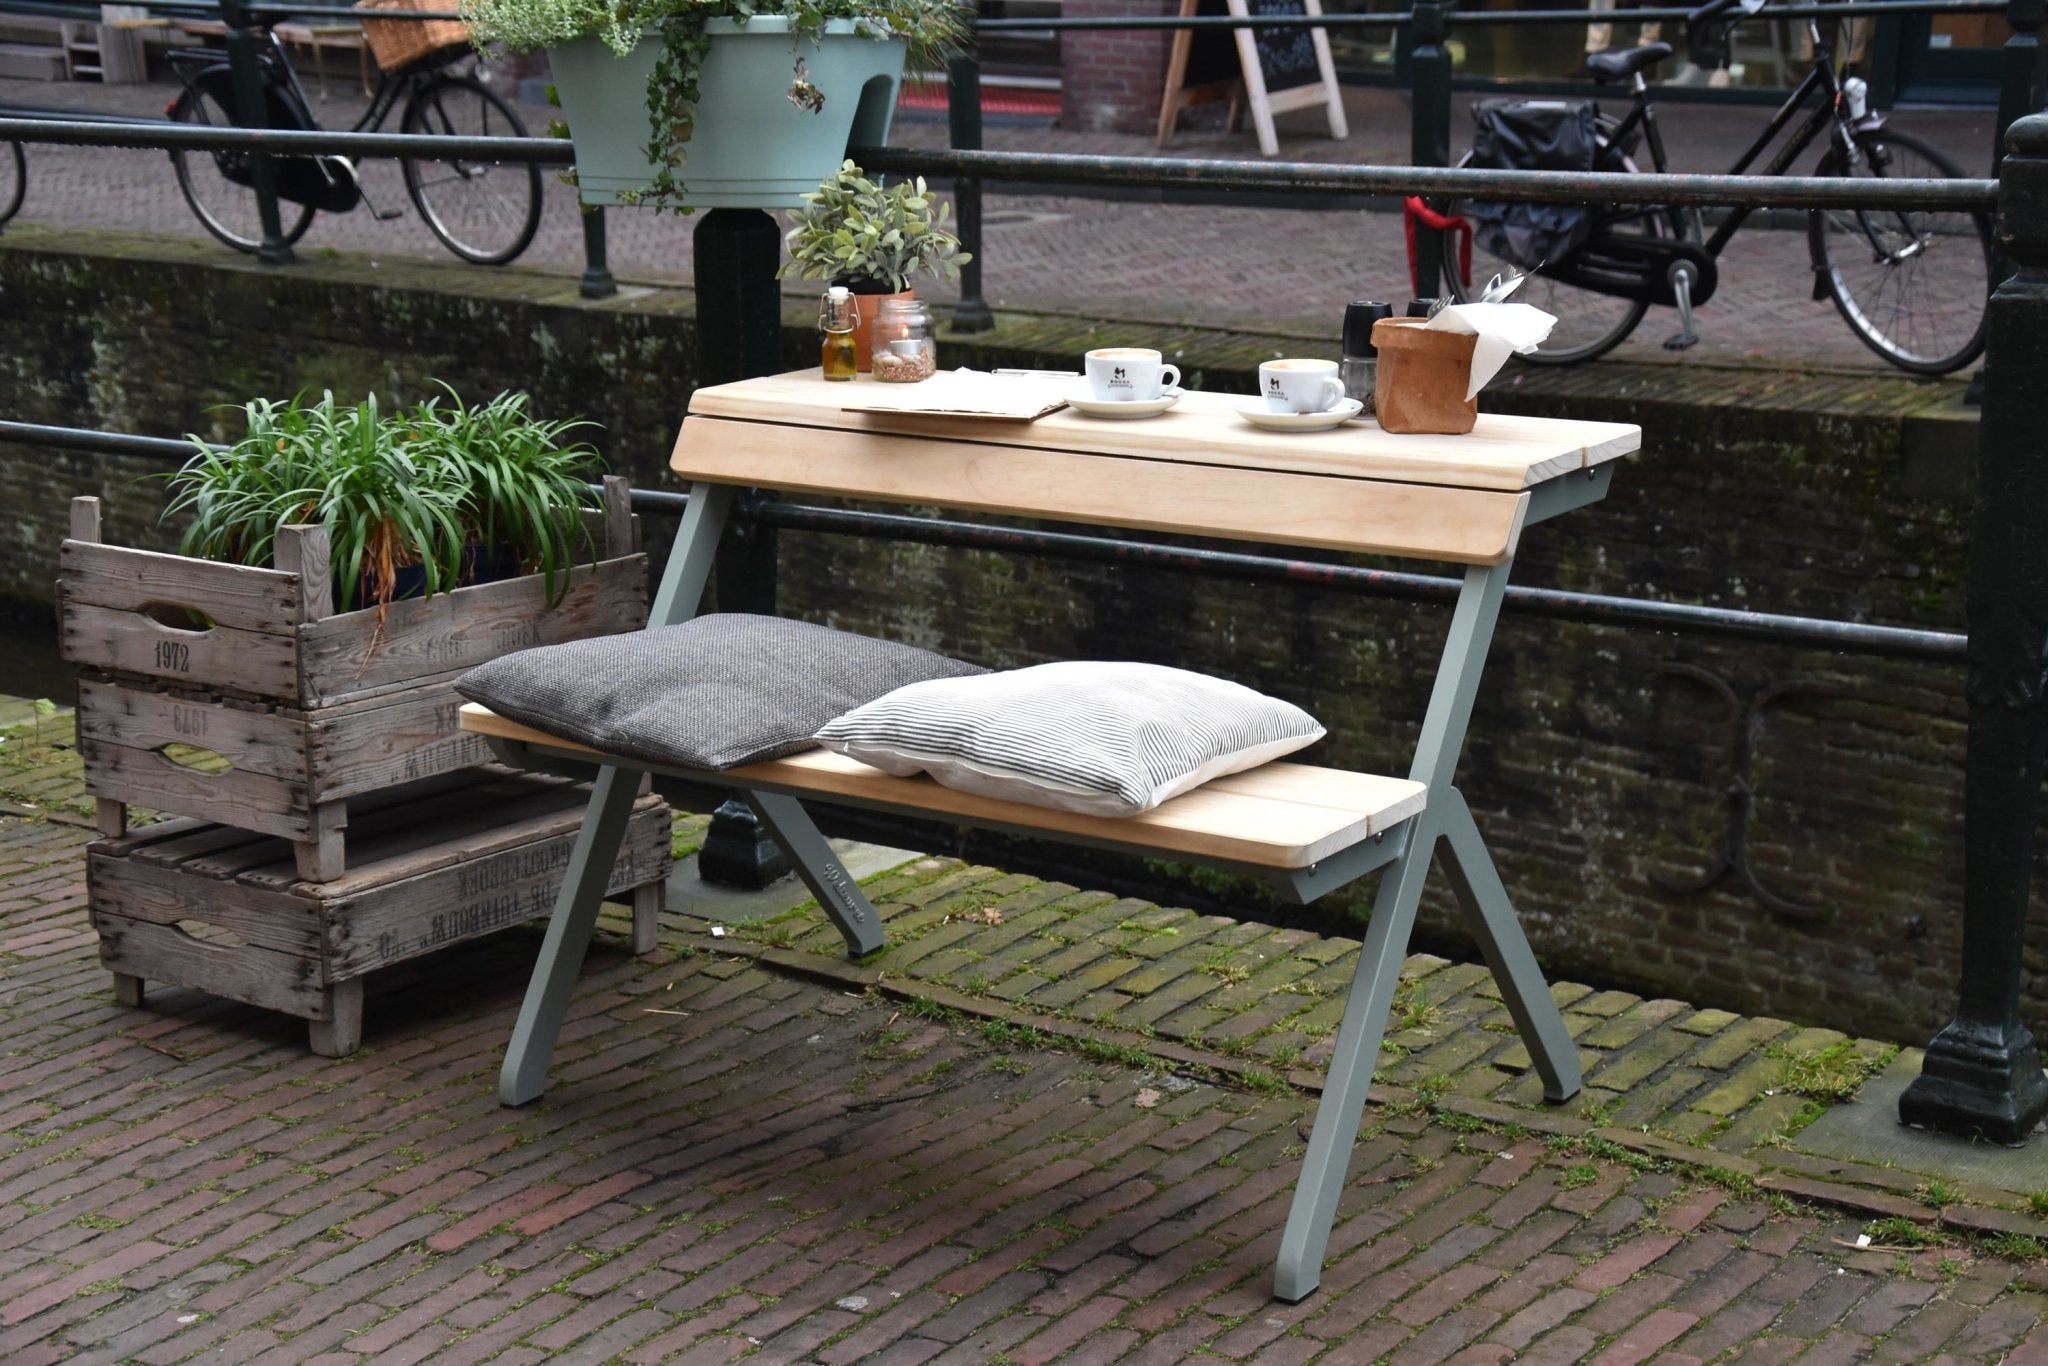 Tablebench 2 or 4 seater - gimmiigimmii